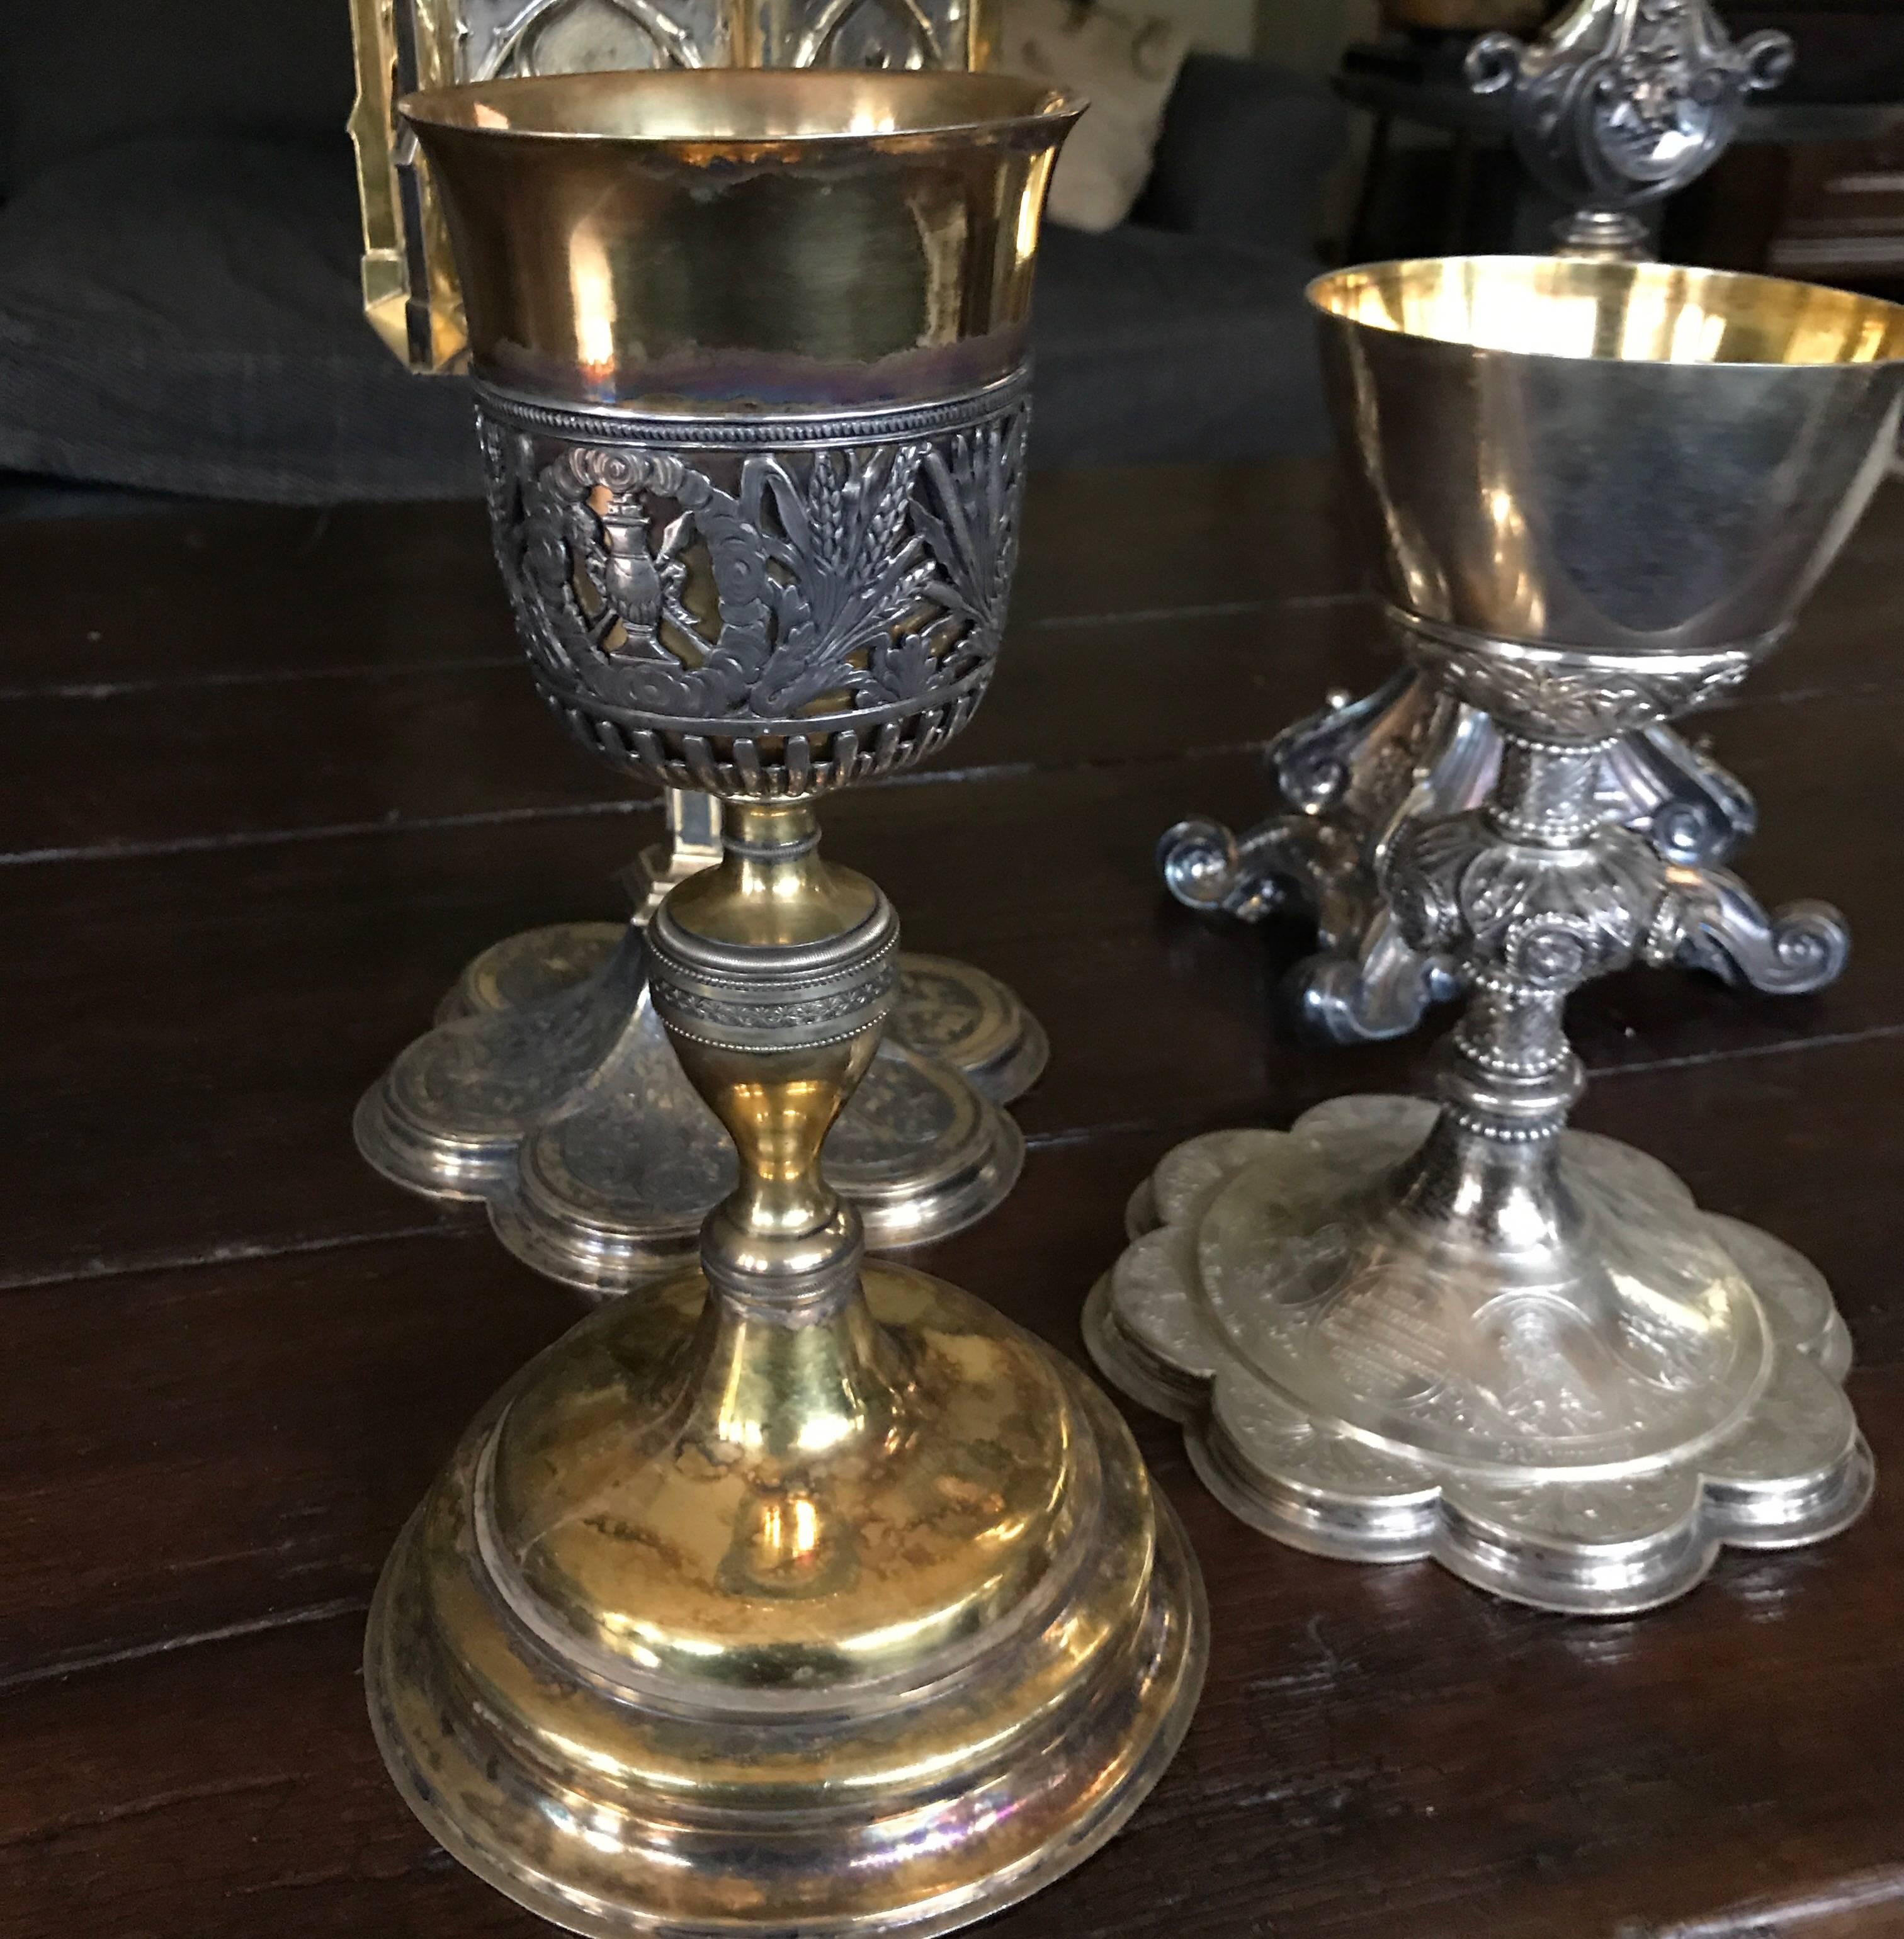 Silver plated late 18-early 19th century church silver
Unique intact and decorative items 
One monstrance
One ciborium
Two challices
Complete and intact off very high quality silver and gold-plated church silver
France.